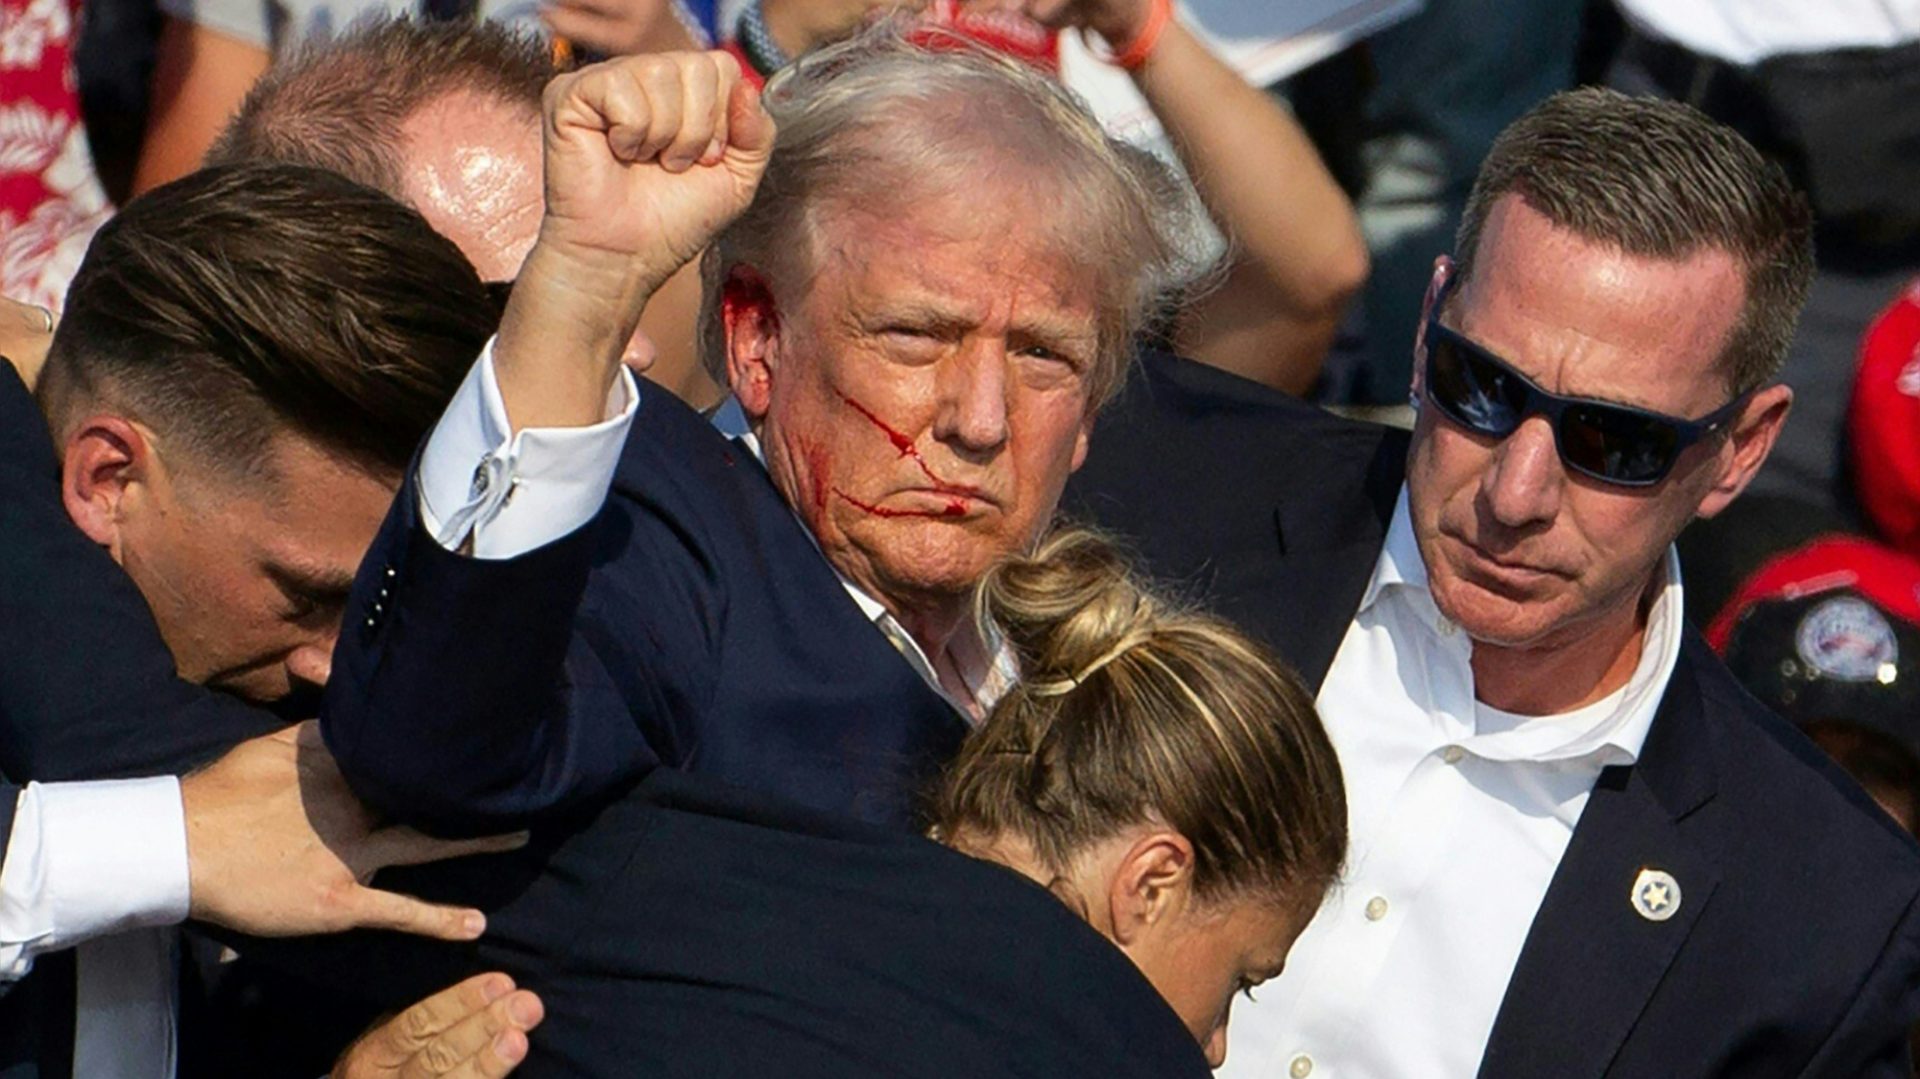 A bloodied Donald Trump in the seconds after he was shot at a rally in Butler, Pennsylvania, on Saturday, July 13. Photo: Rebecca Droke/AFP/Getty